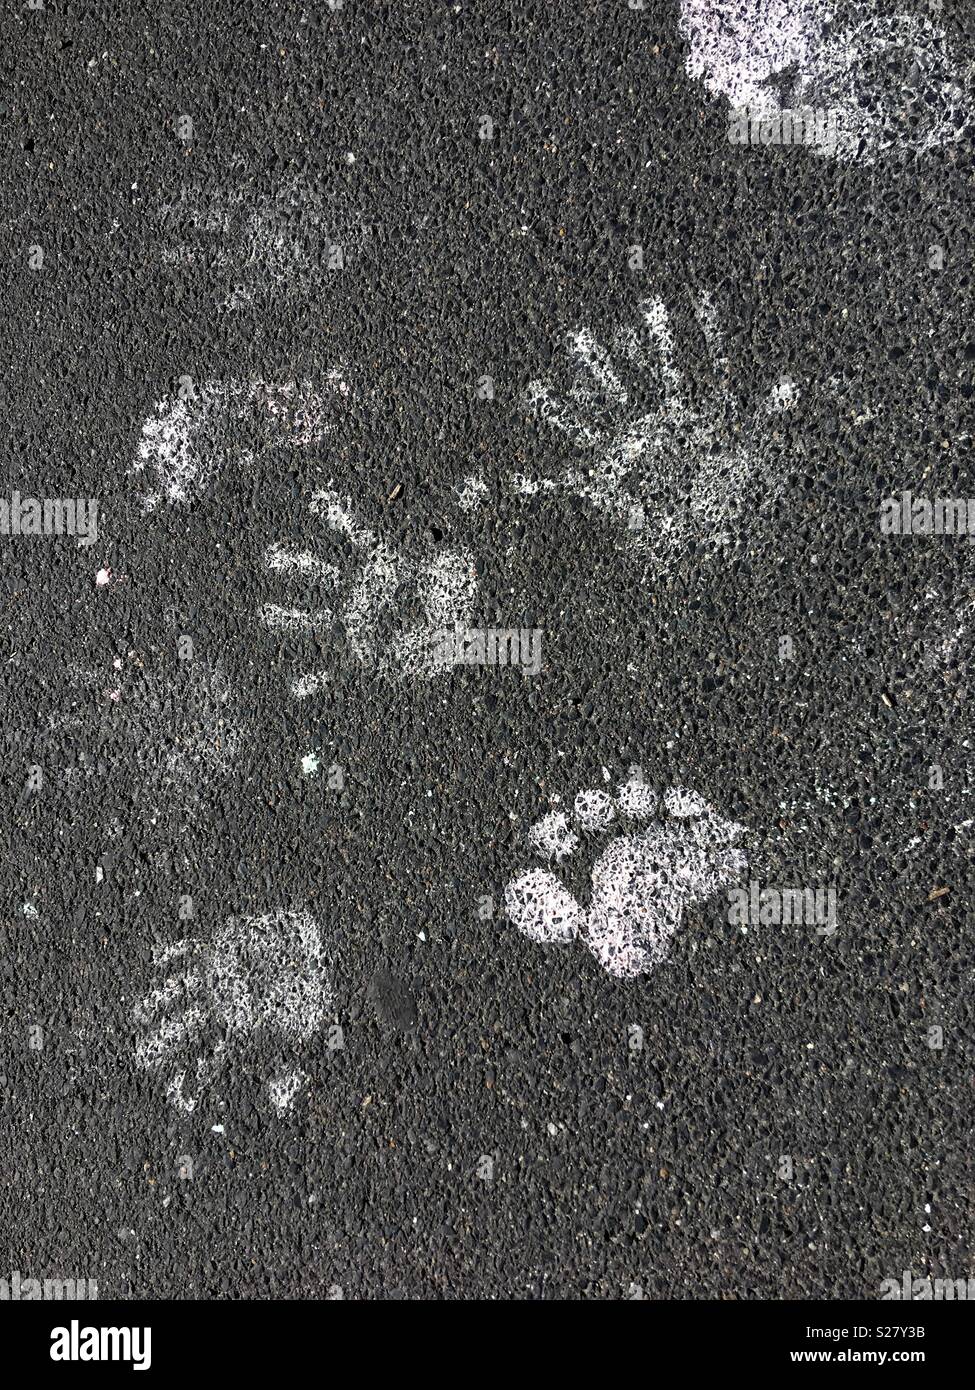 White hand and foot prints on the tarmac Stock Photo